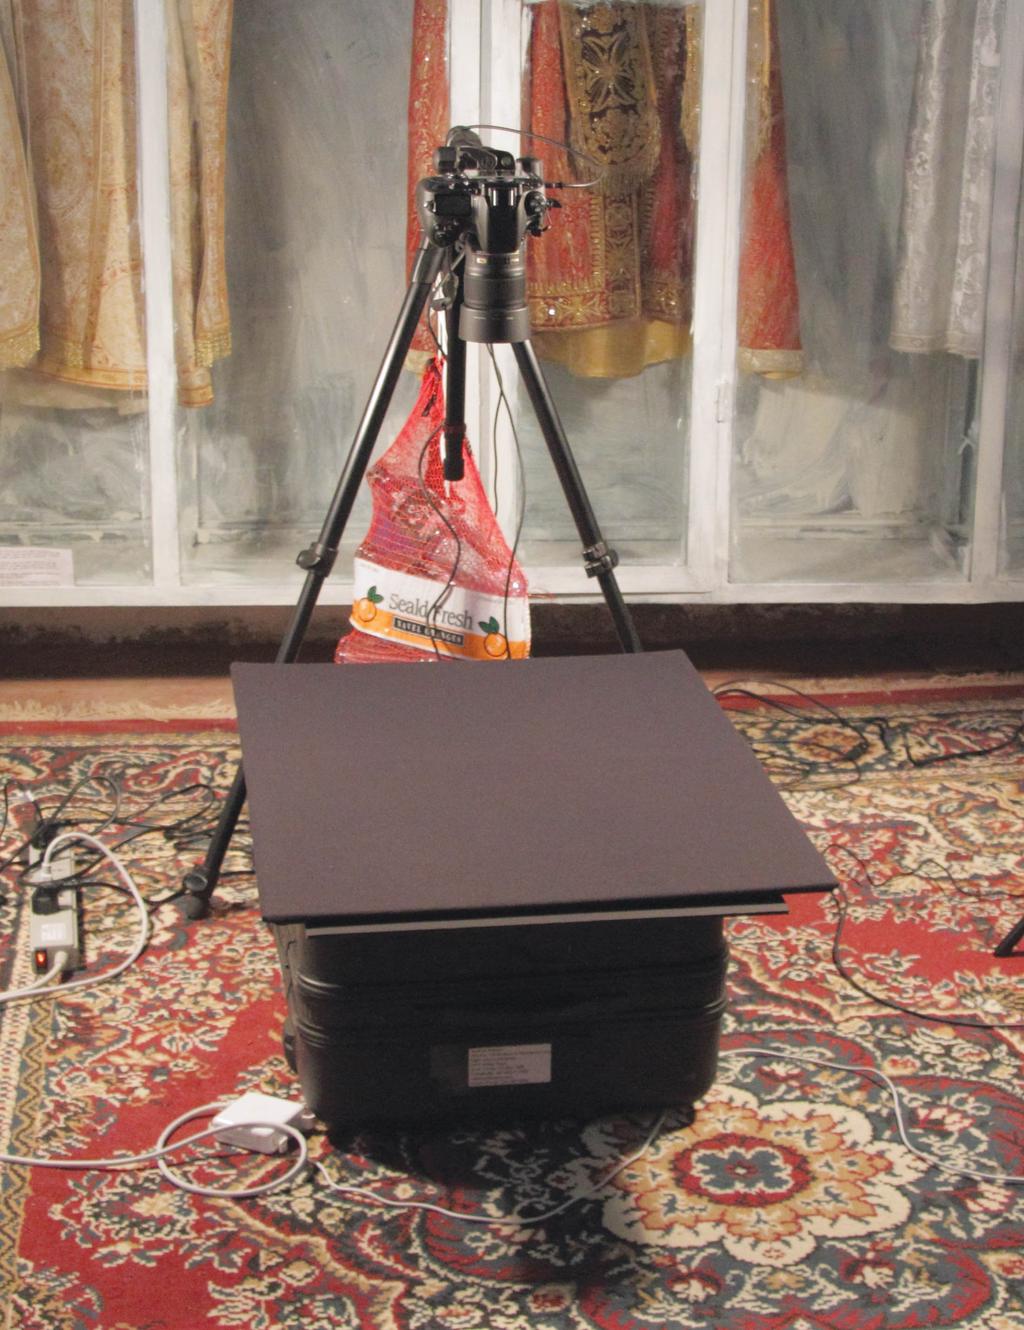 Improvised Manuscript Photography Setup. Tripod with sidearm allows camera to get a straight-down view of the subject matter. Suitcase serves as temporary table.